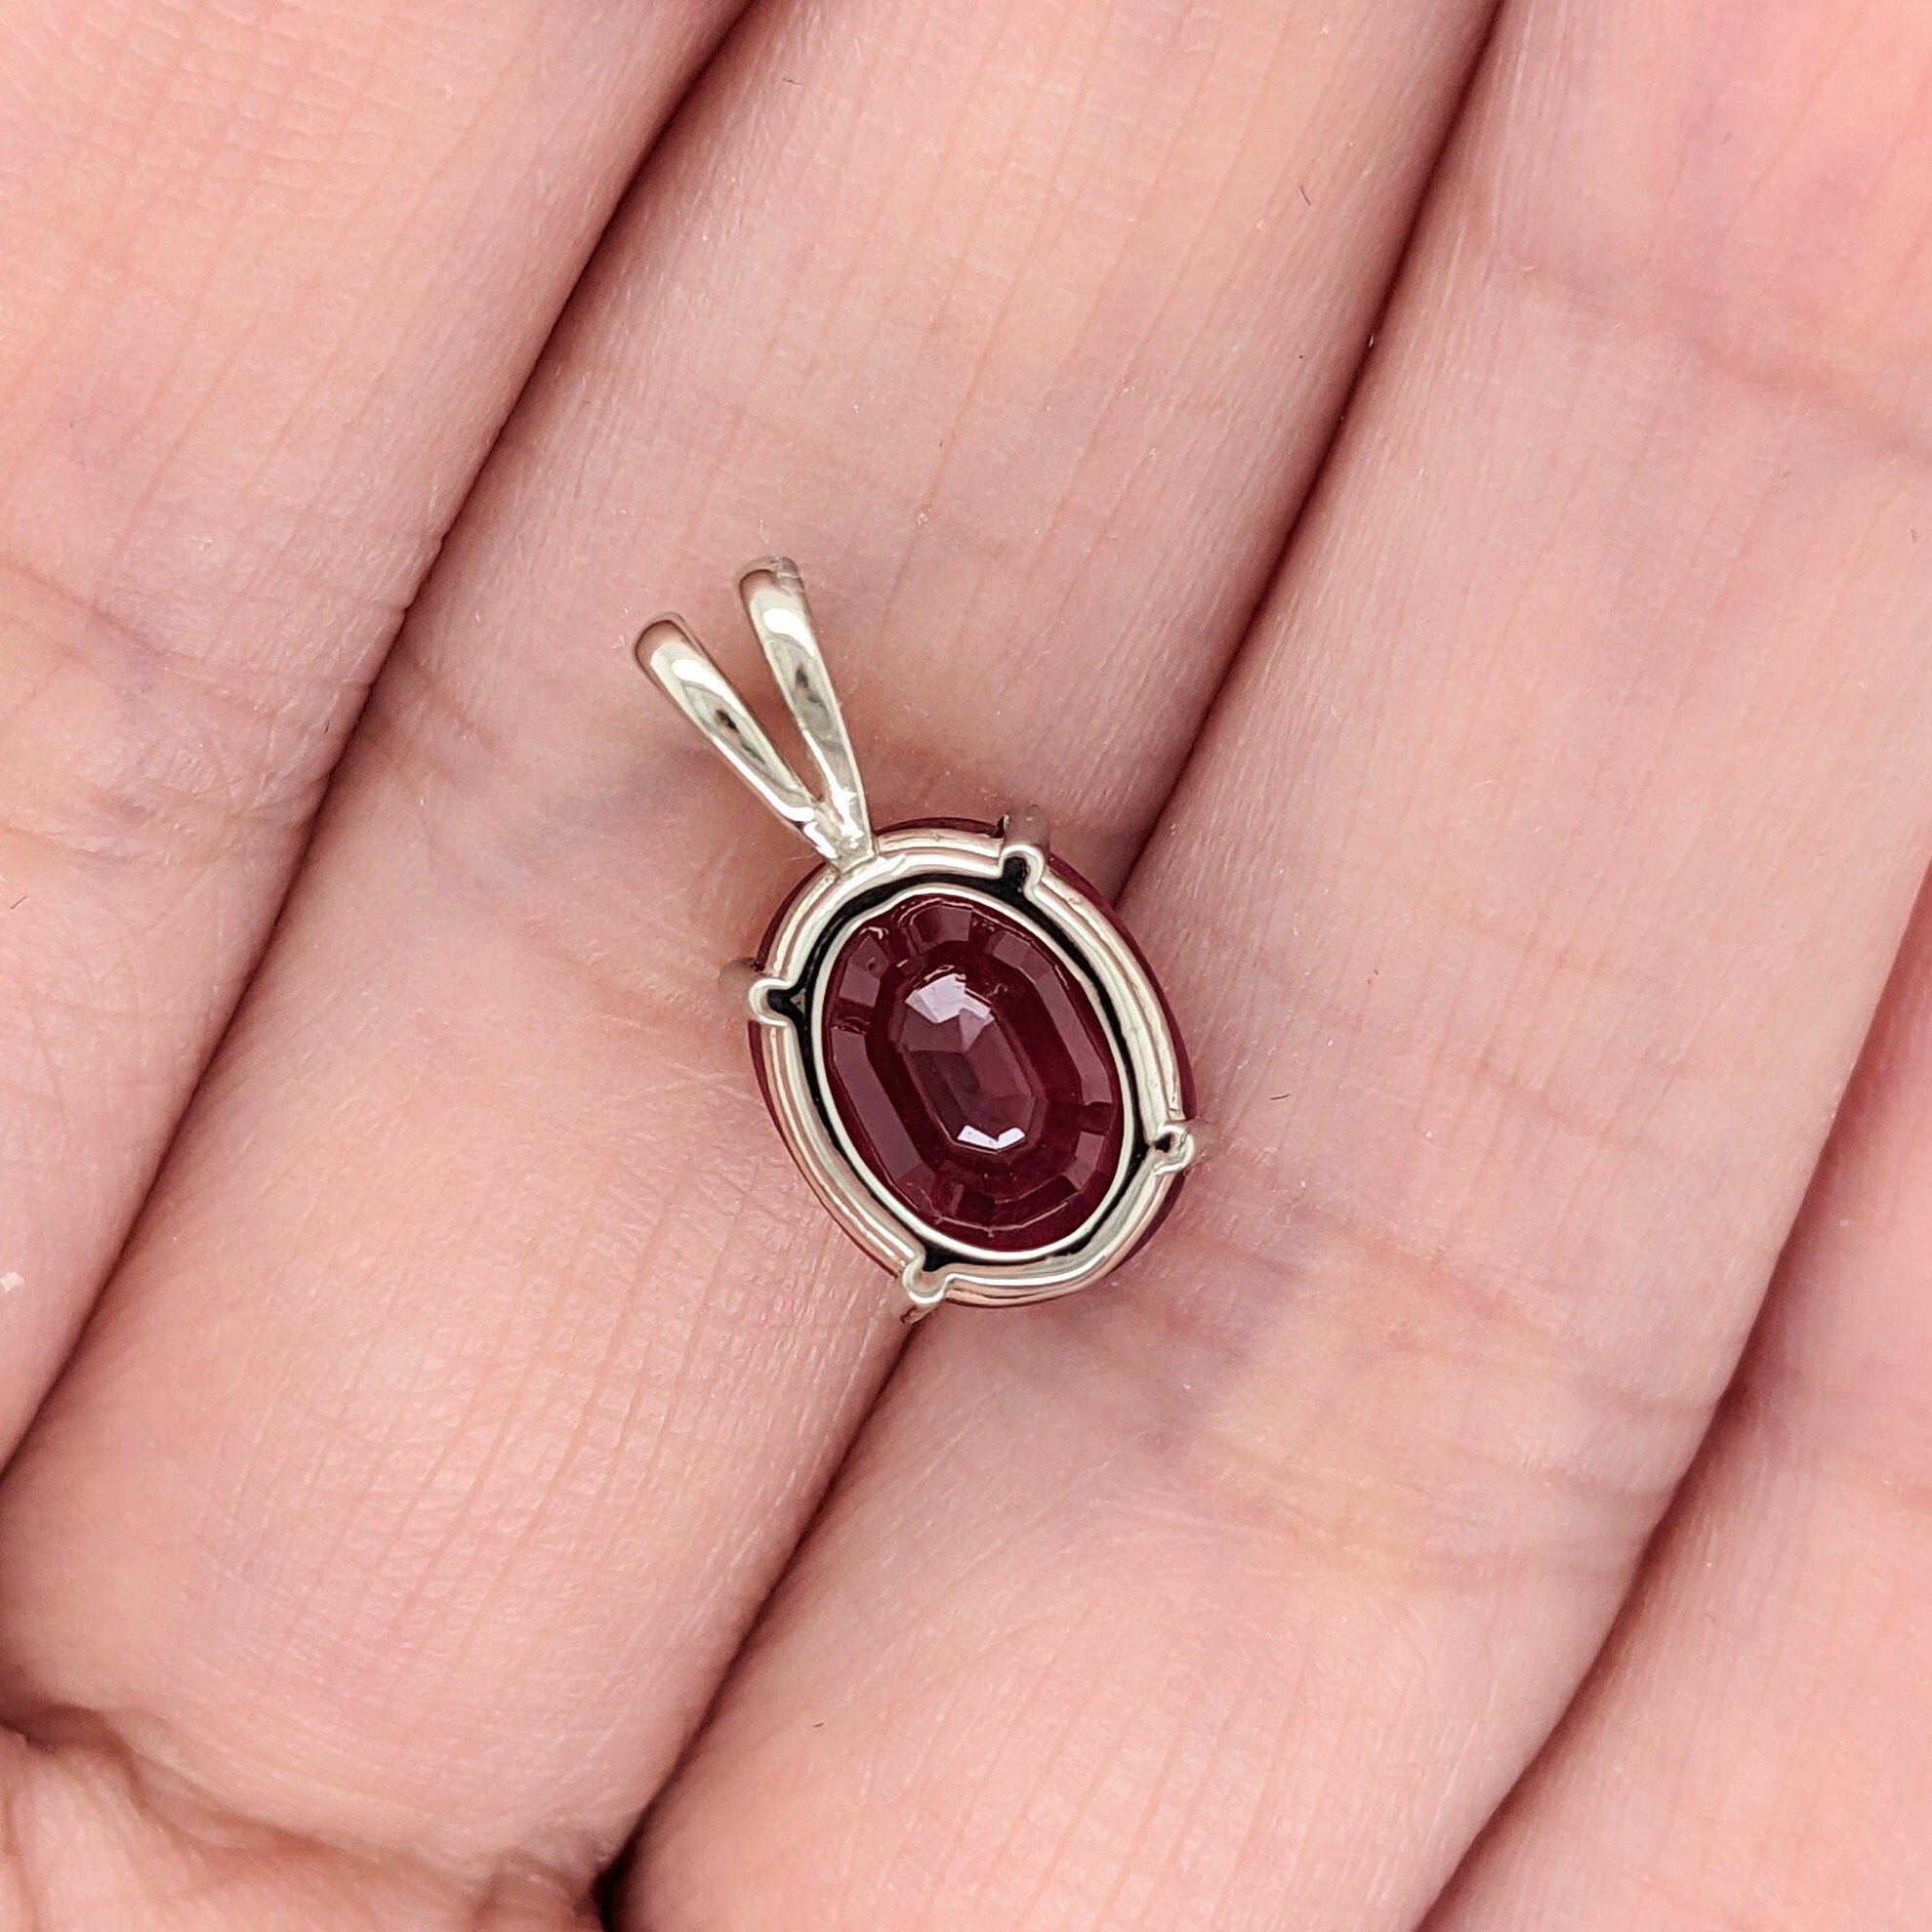 Pendants-Classy Pigeon Blood Red Ruby Pendant in Solid 14K White, Yellow or Rose Gold | Oval 10x8mm | July Birthstone | Rabbit Ear Bail | Prong Set - NNJGemstones